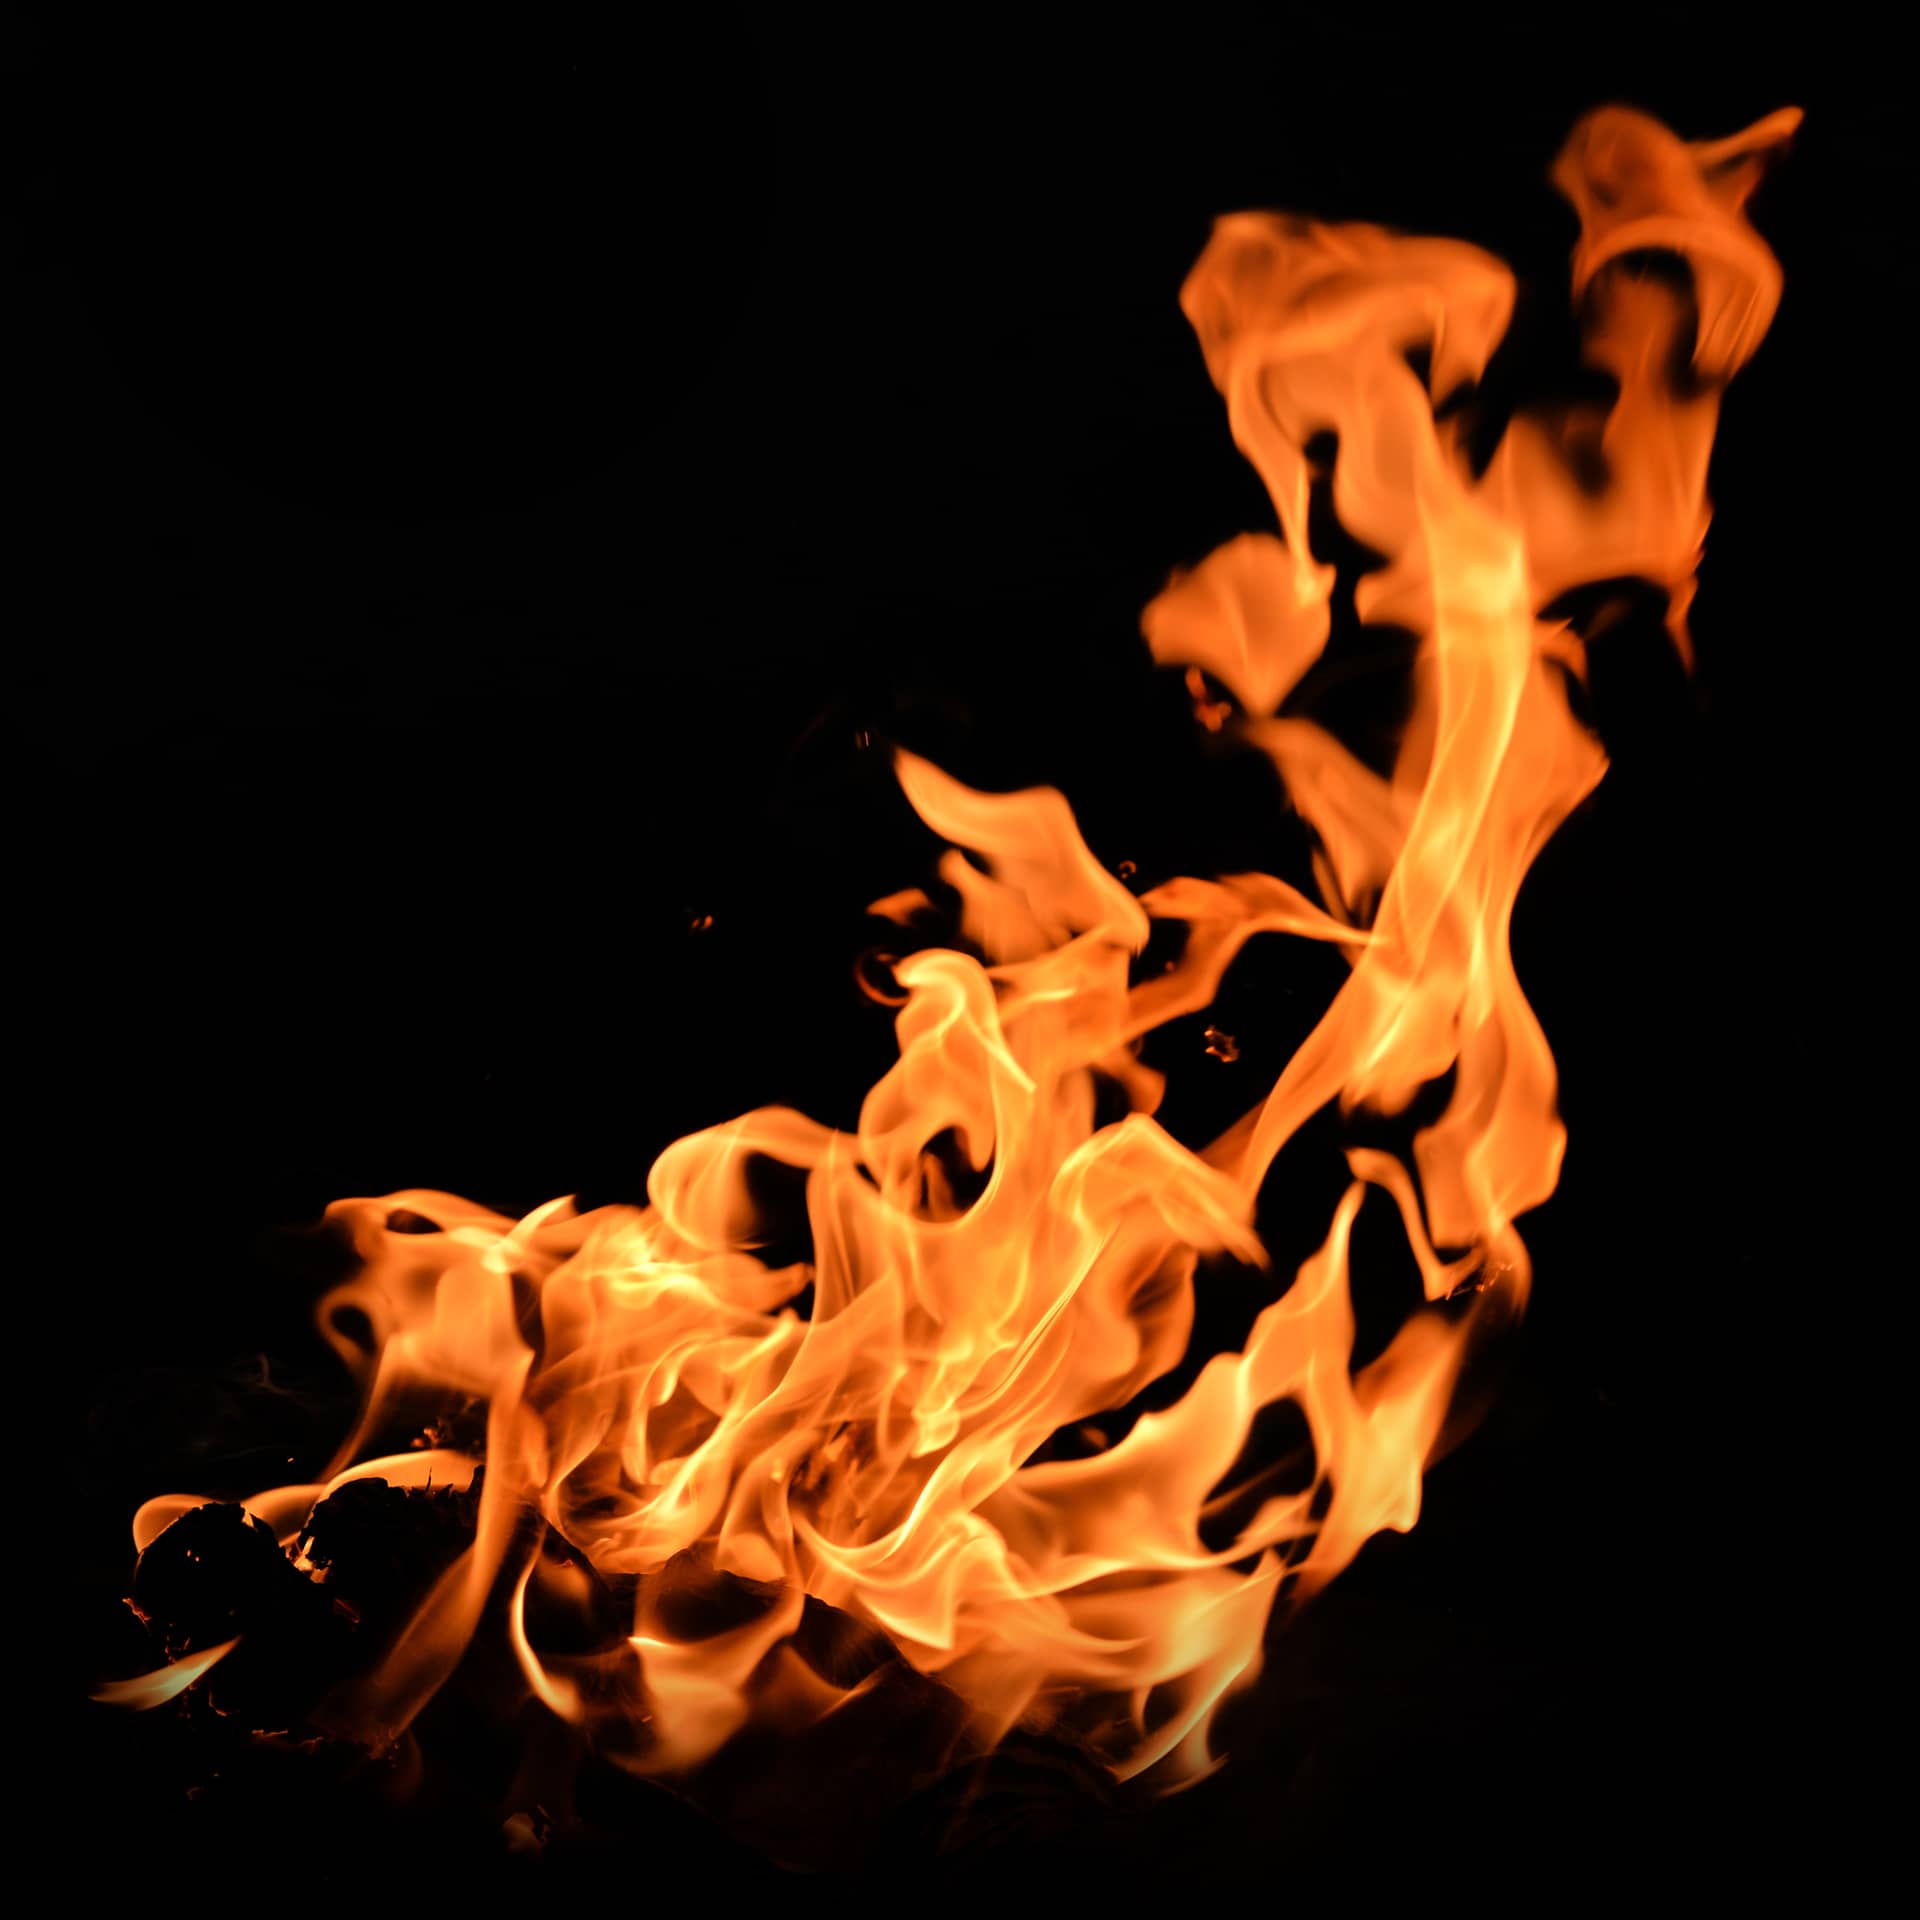 Fire flames isolated black fire profile pics